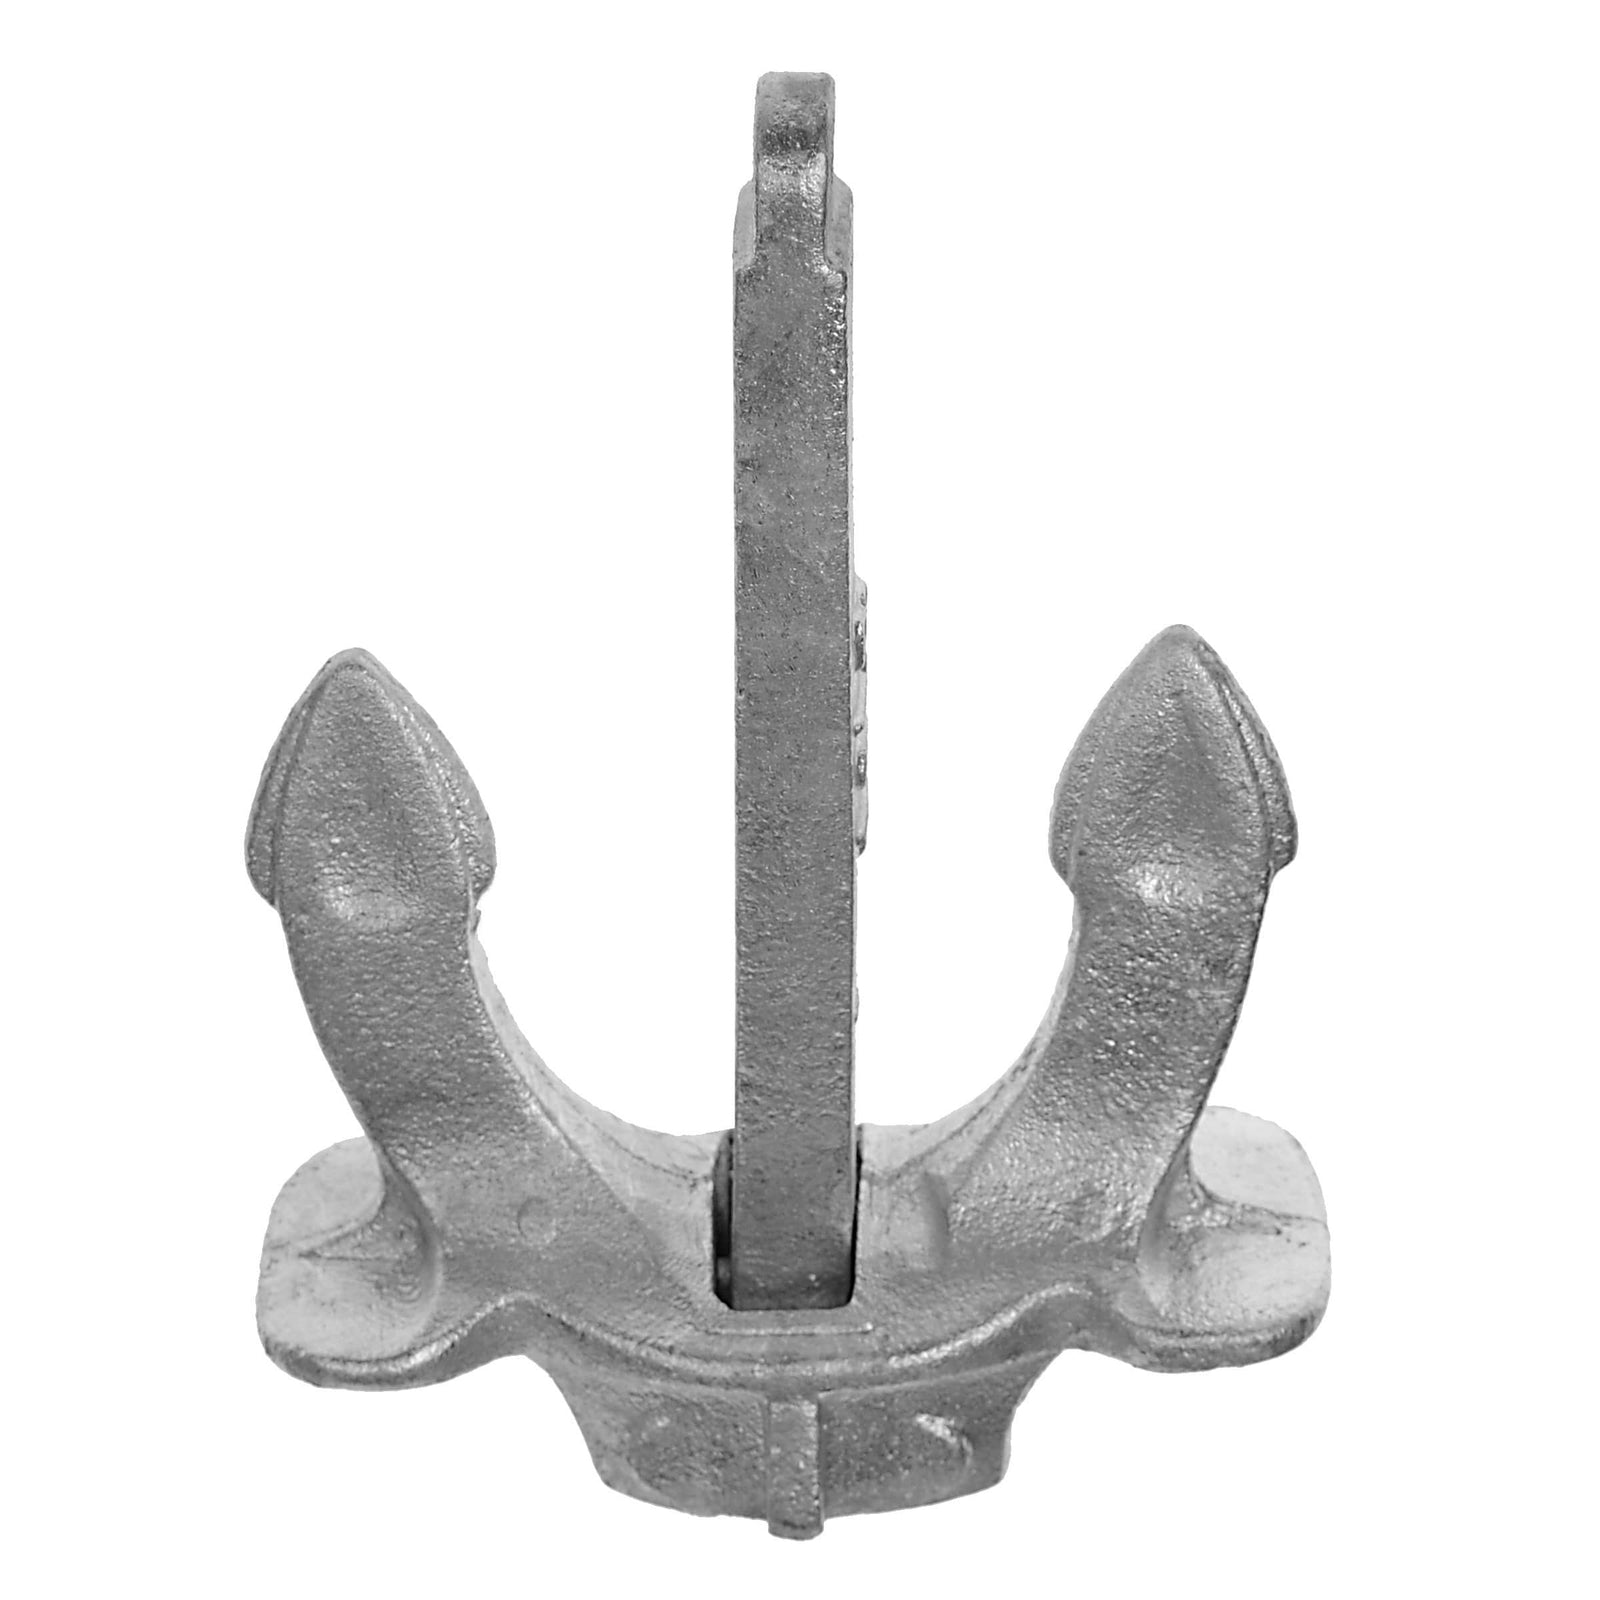 Cast Iron Stockless Hall Boat Anchor, 10 lbs